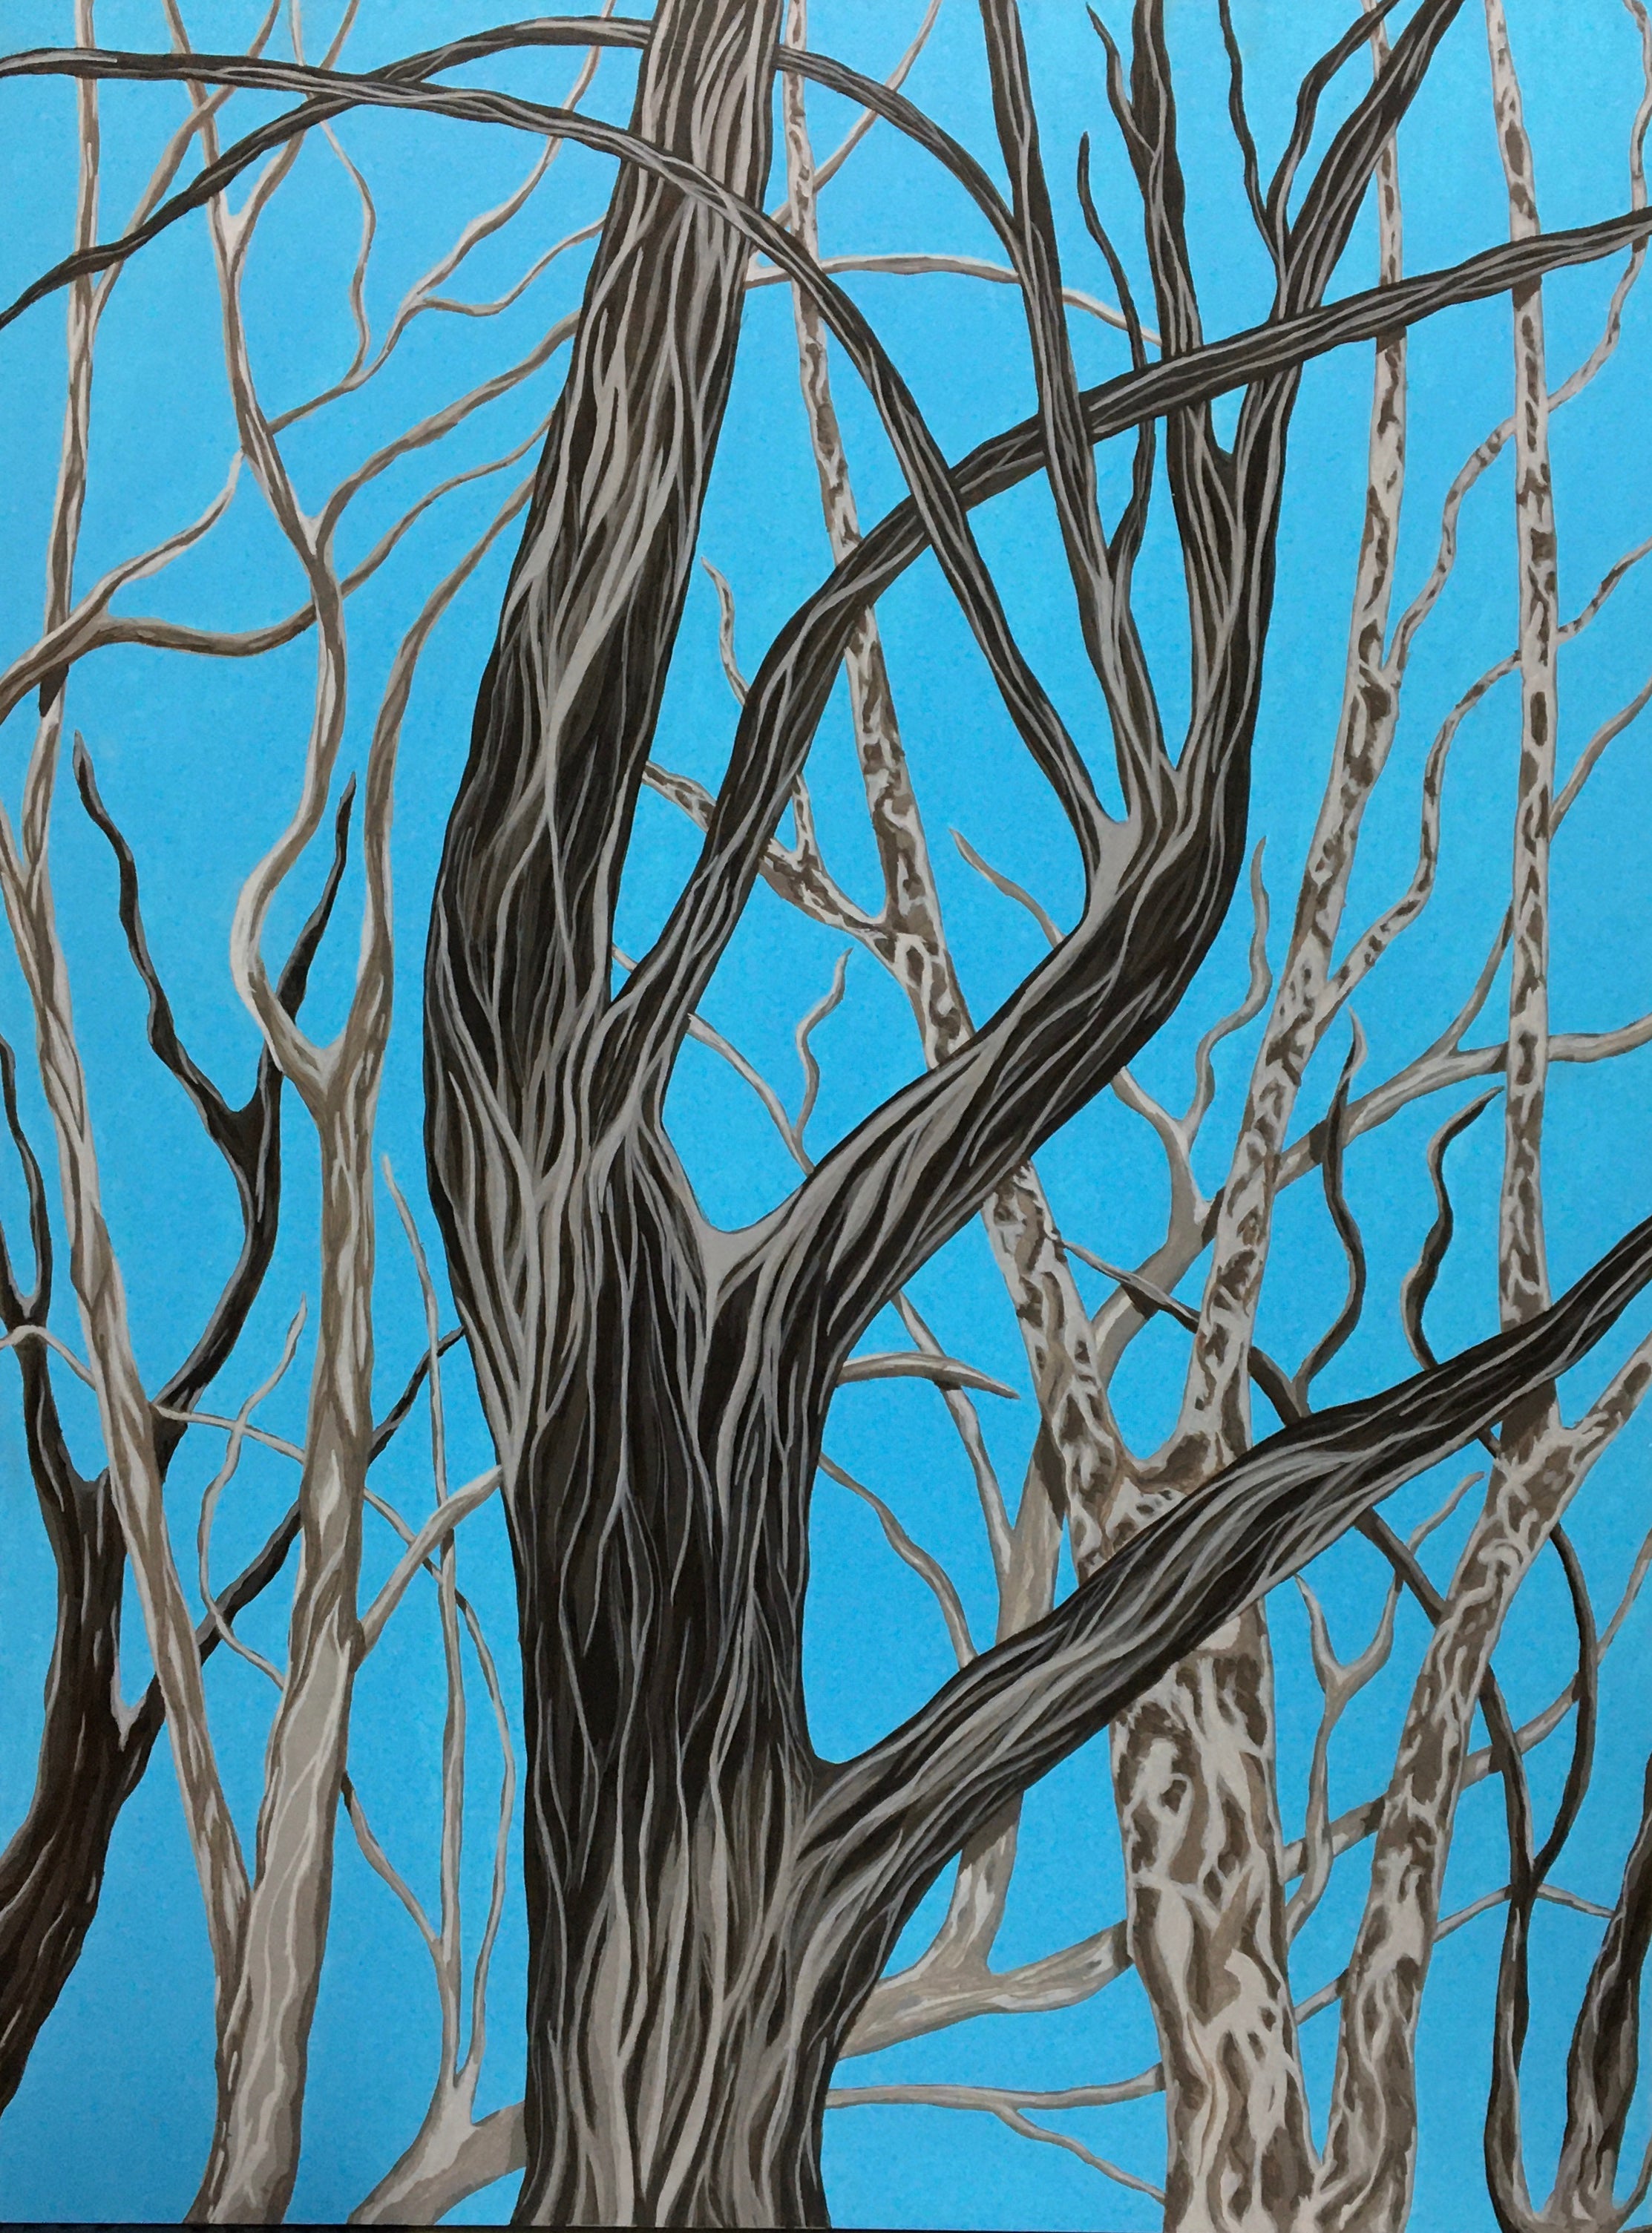 'BARE TREES ON A CHILLY DAY' - Acrylic on Hardboard Panel